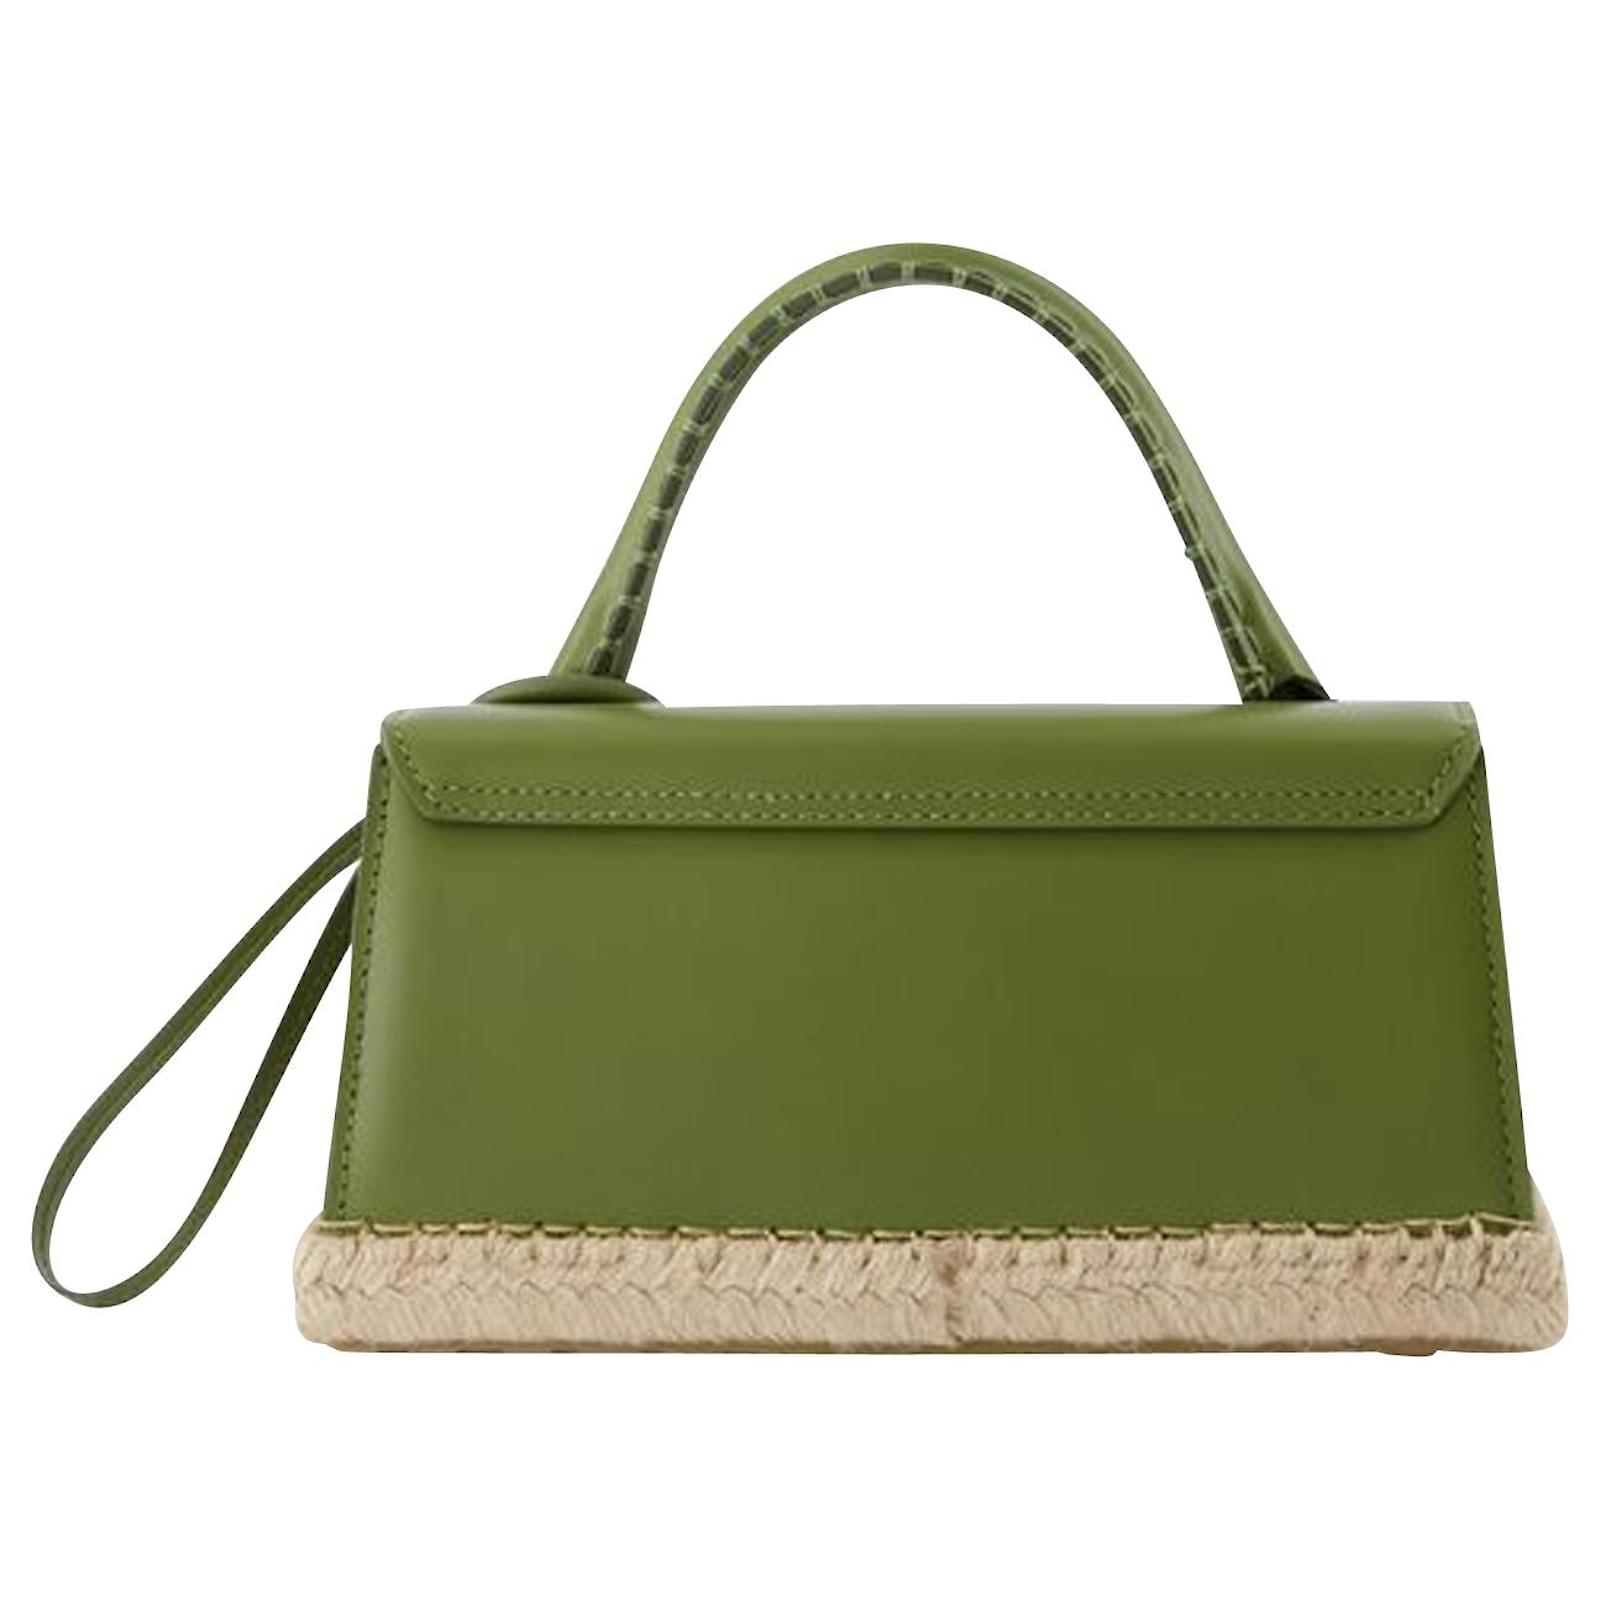 JACQUEMUS Le Chiquito Long leather tote